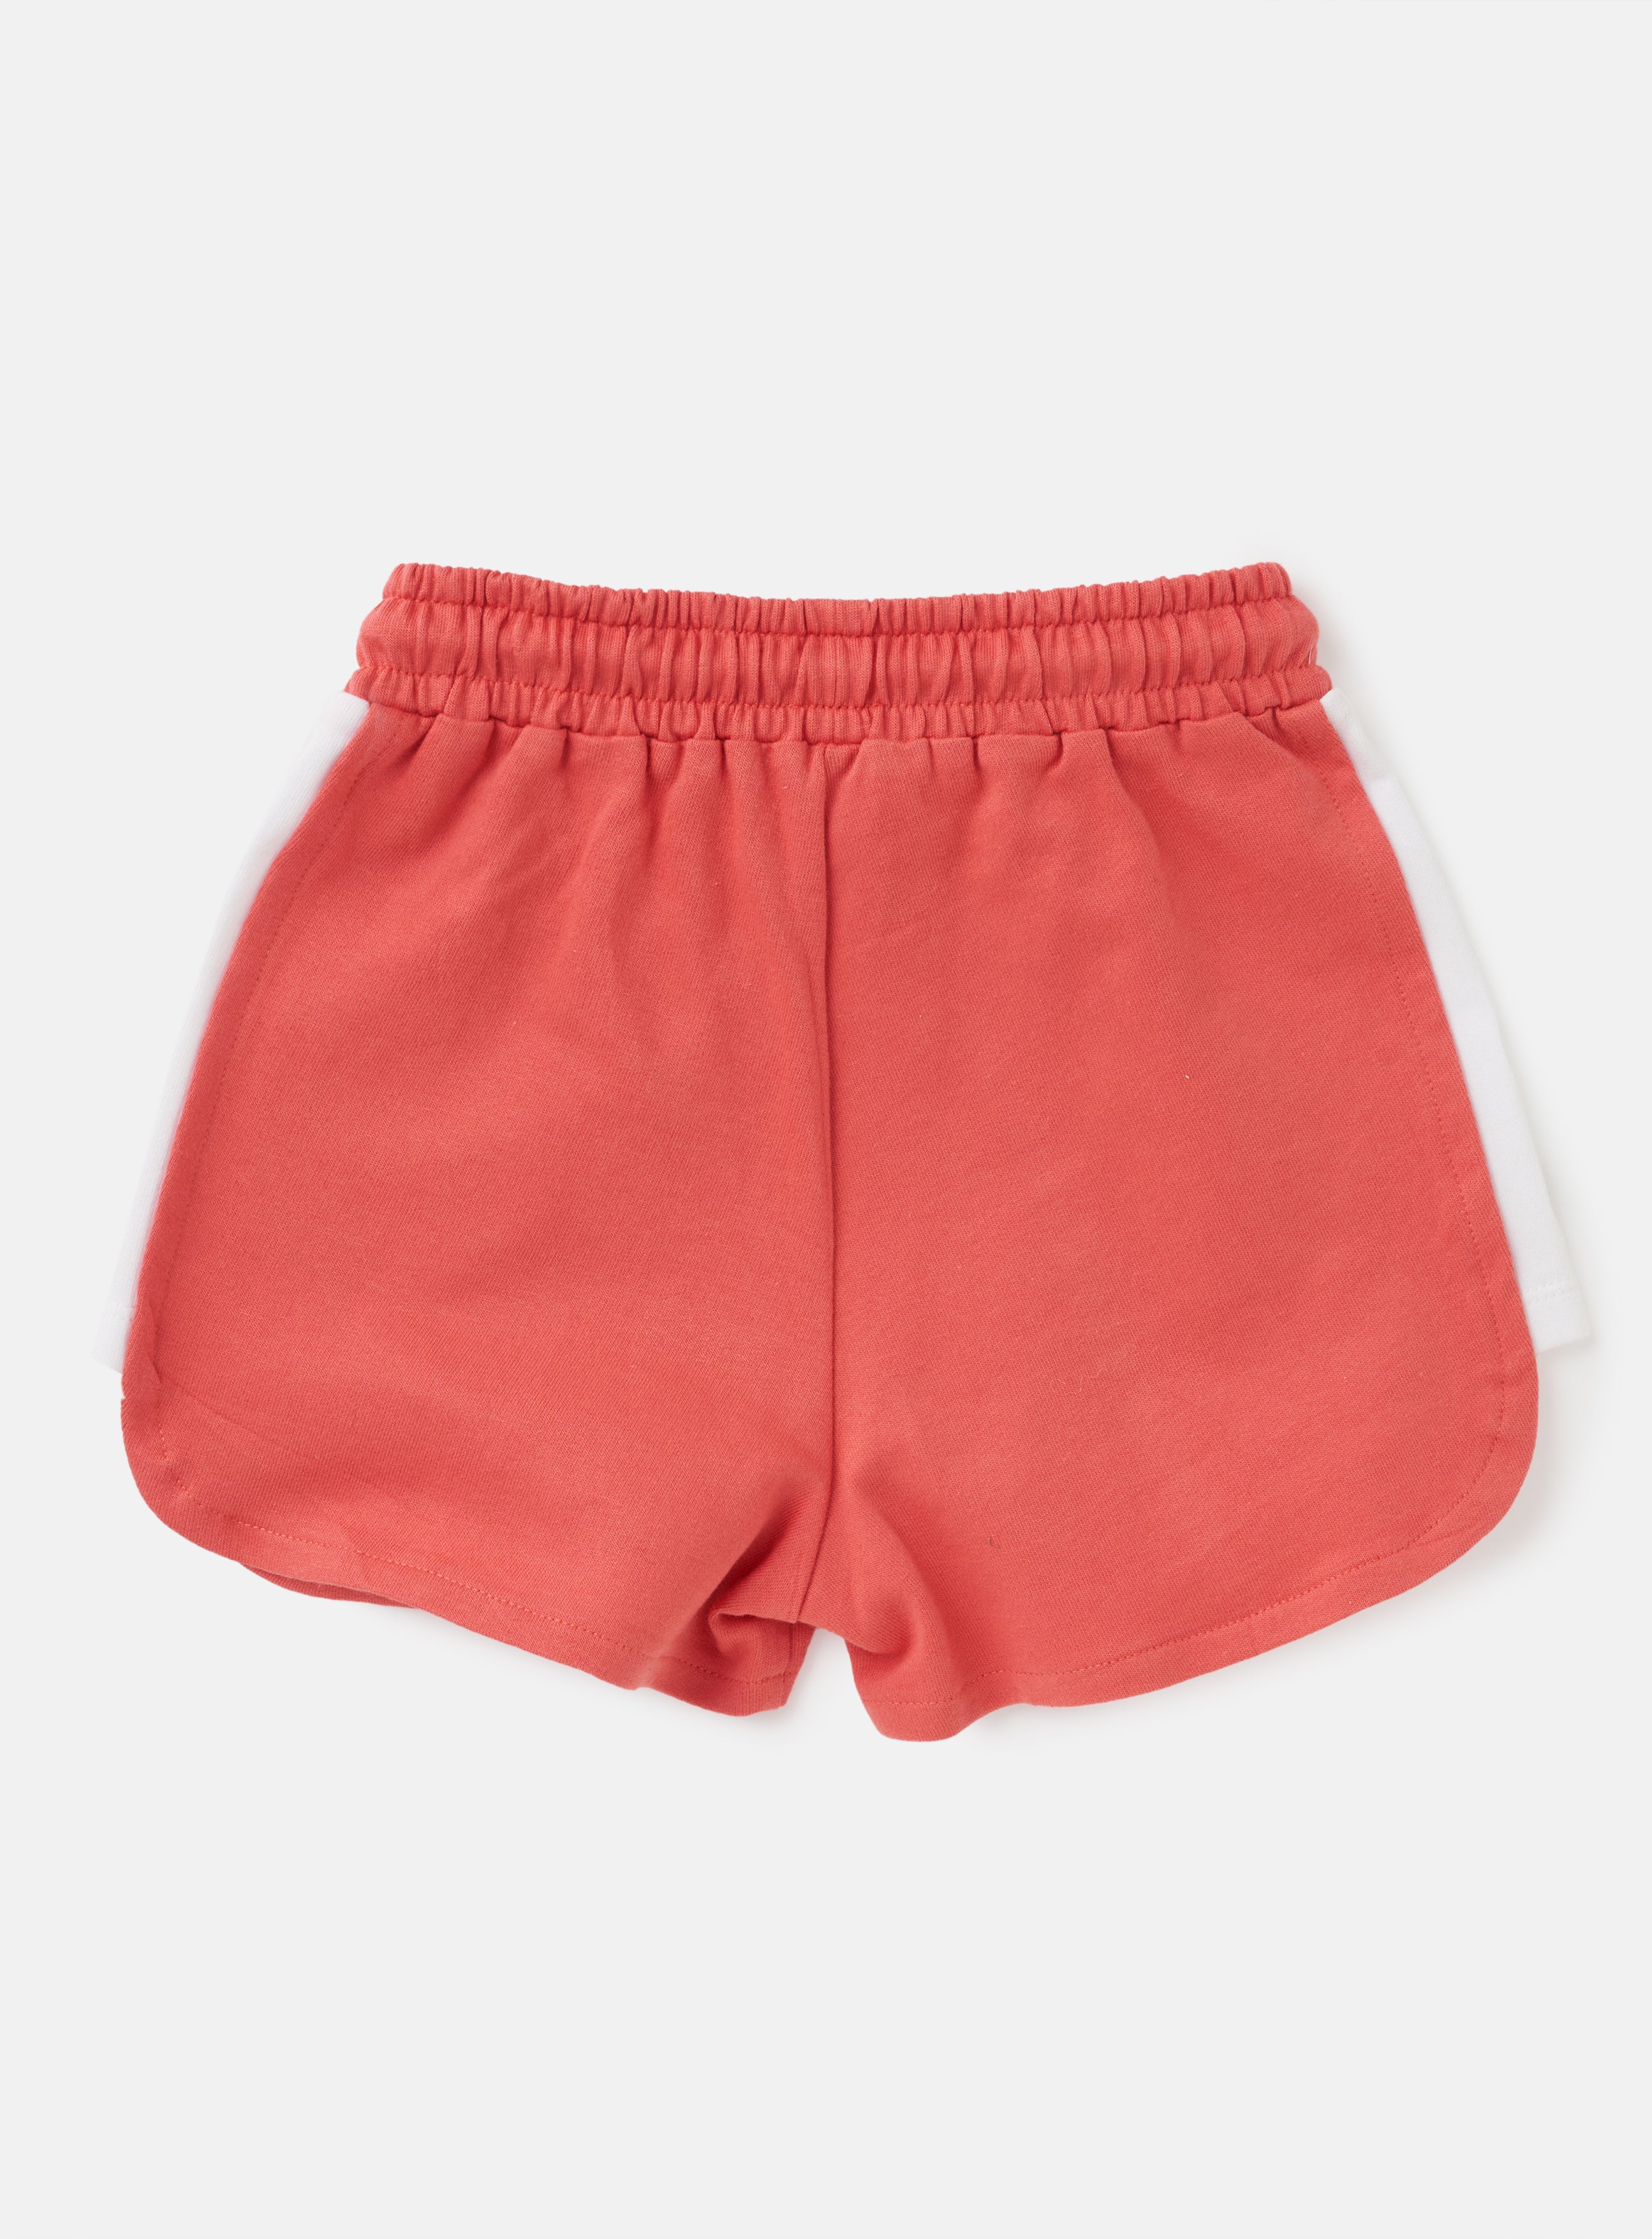 Girls Solid Red Cotton Shorts